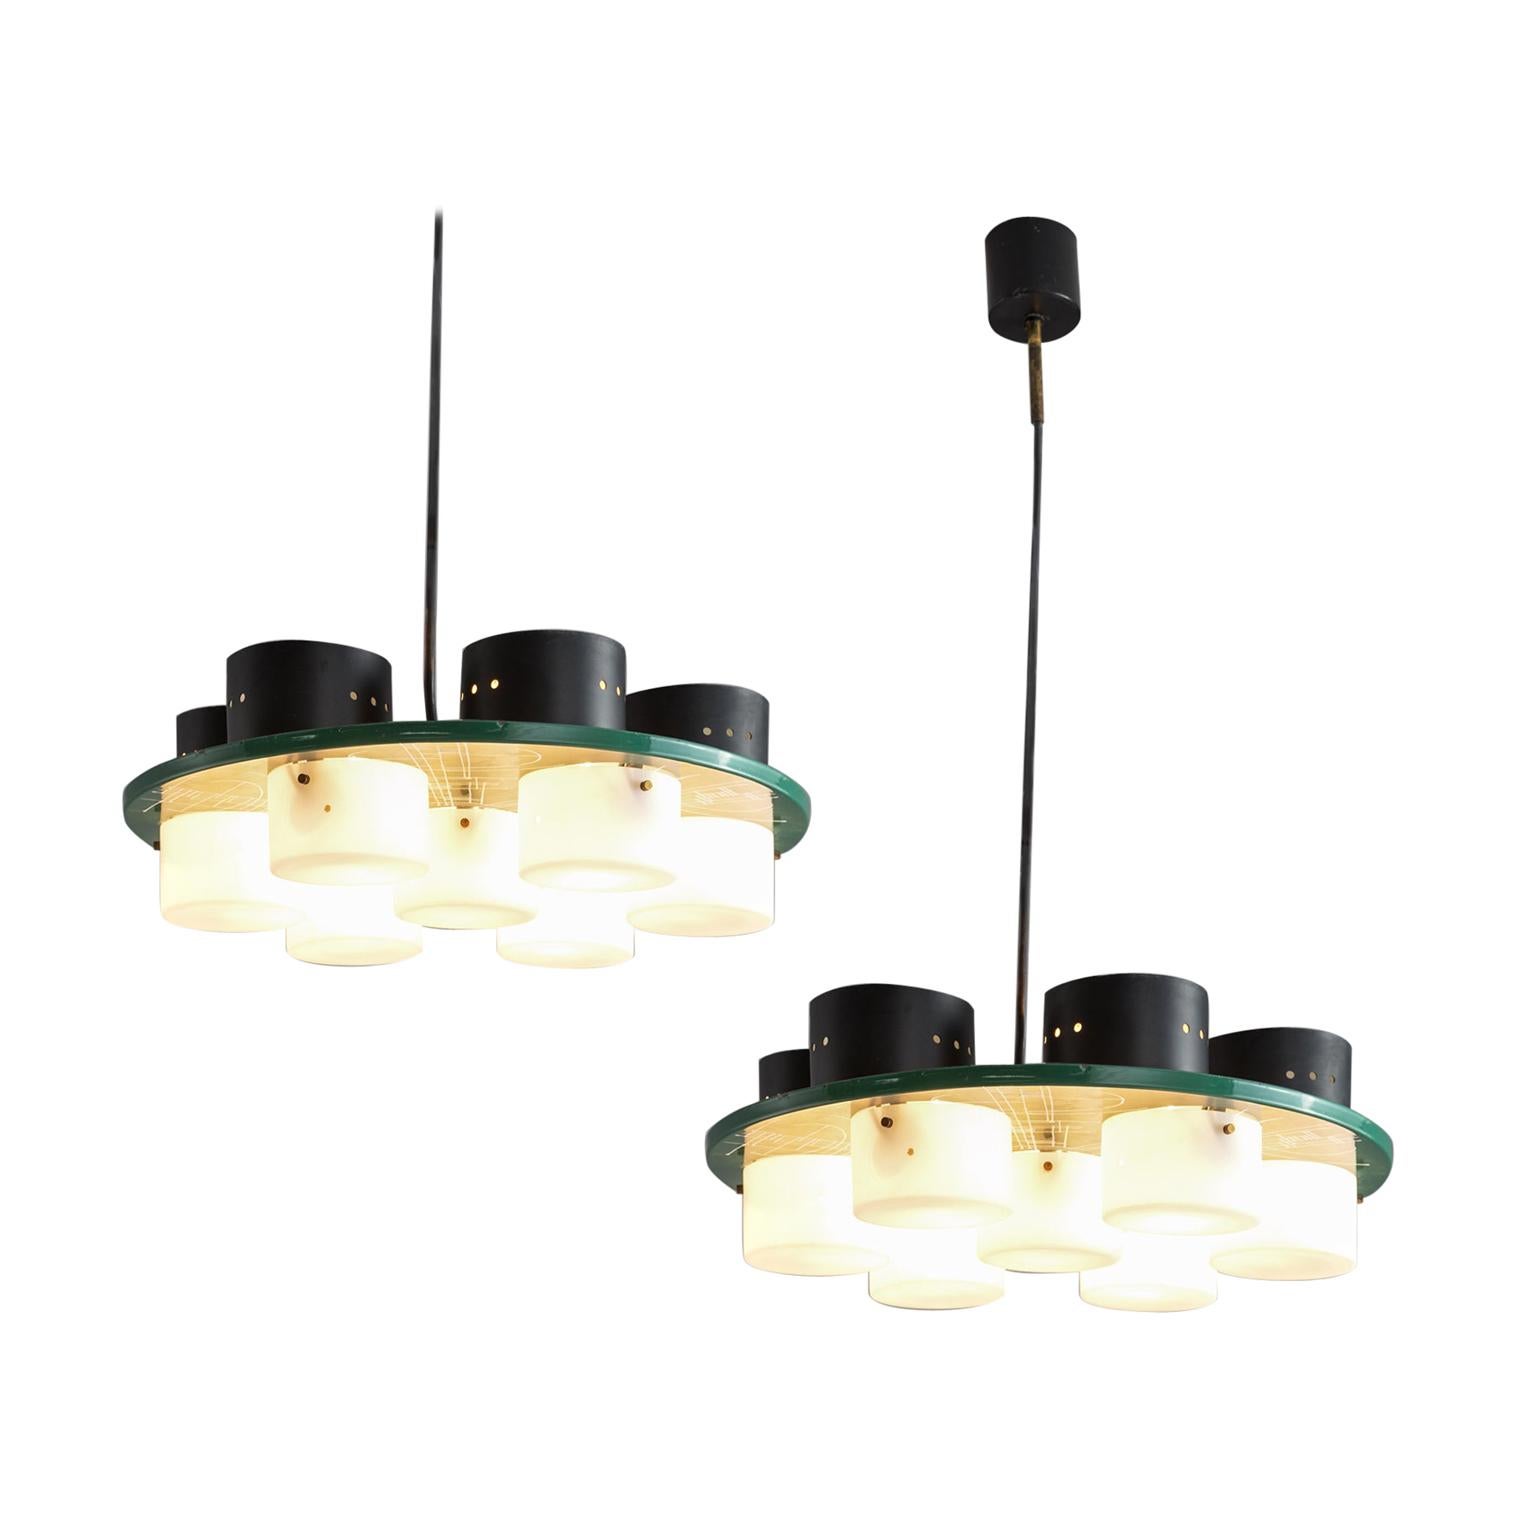 Pair of Italian Ceiling Lights with Six Shades, 1970s